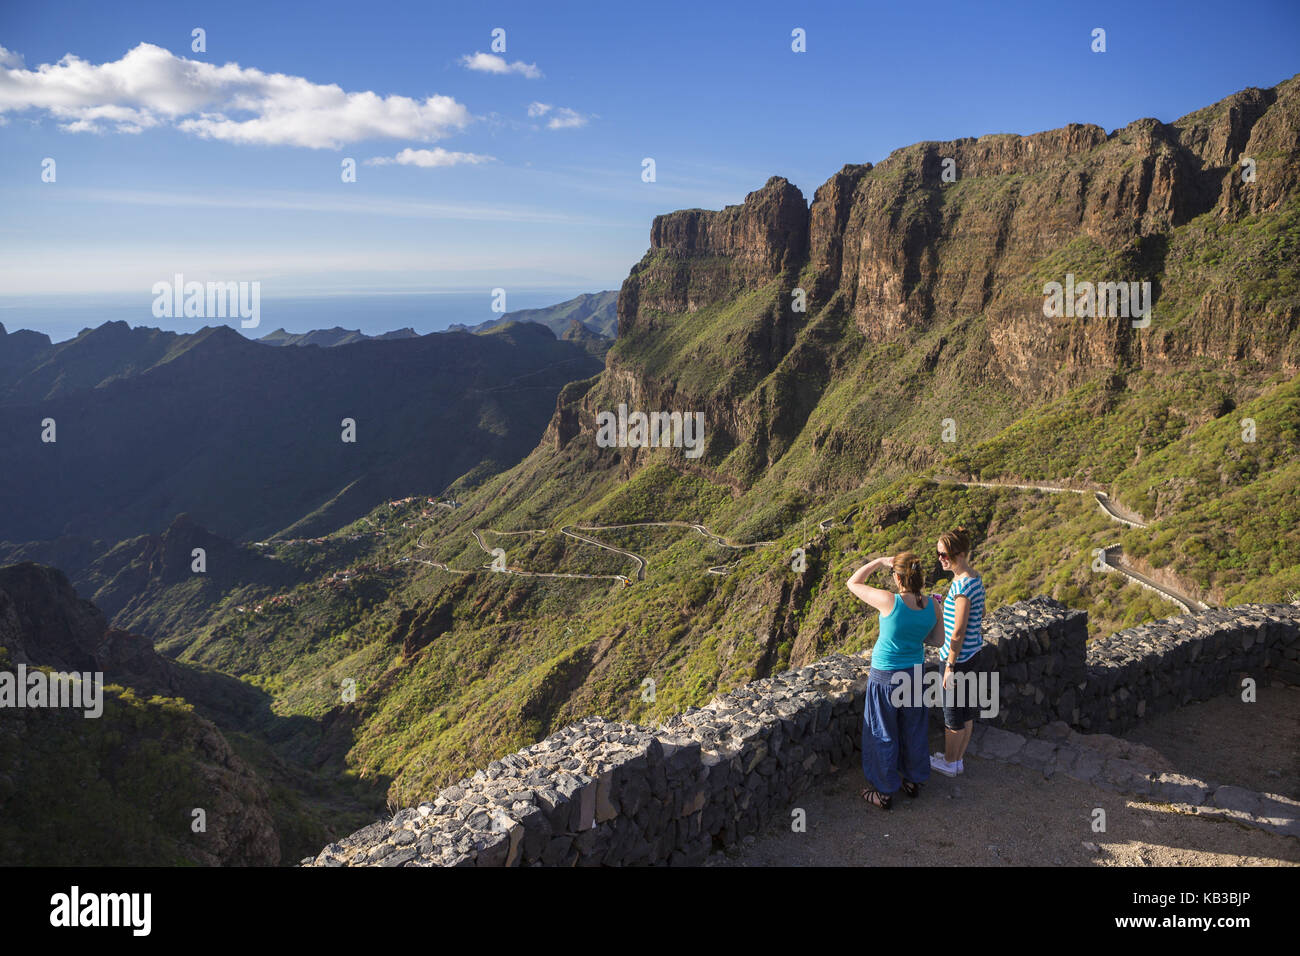 Spain, Canary islands, Tenerife, Masca gulch, lookout, tourists, valley view, Stock Photo